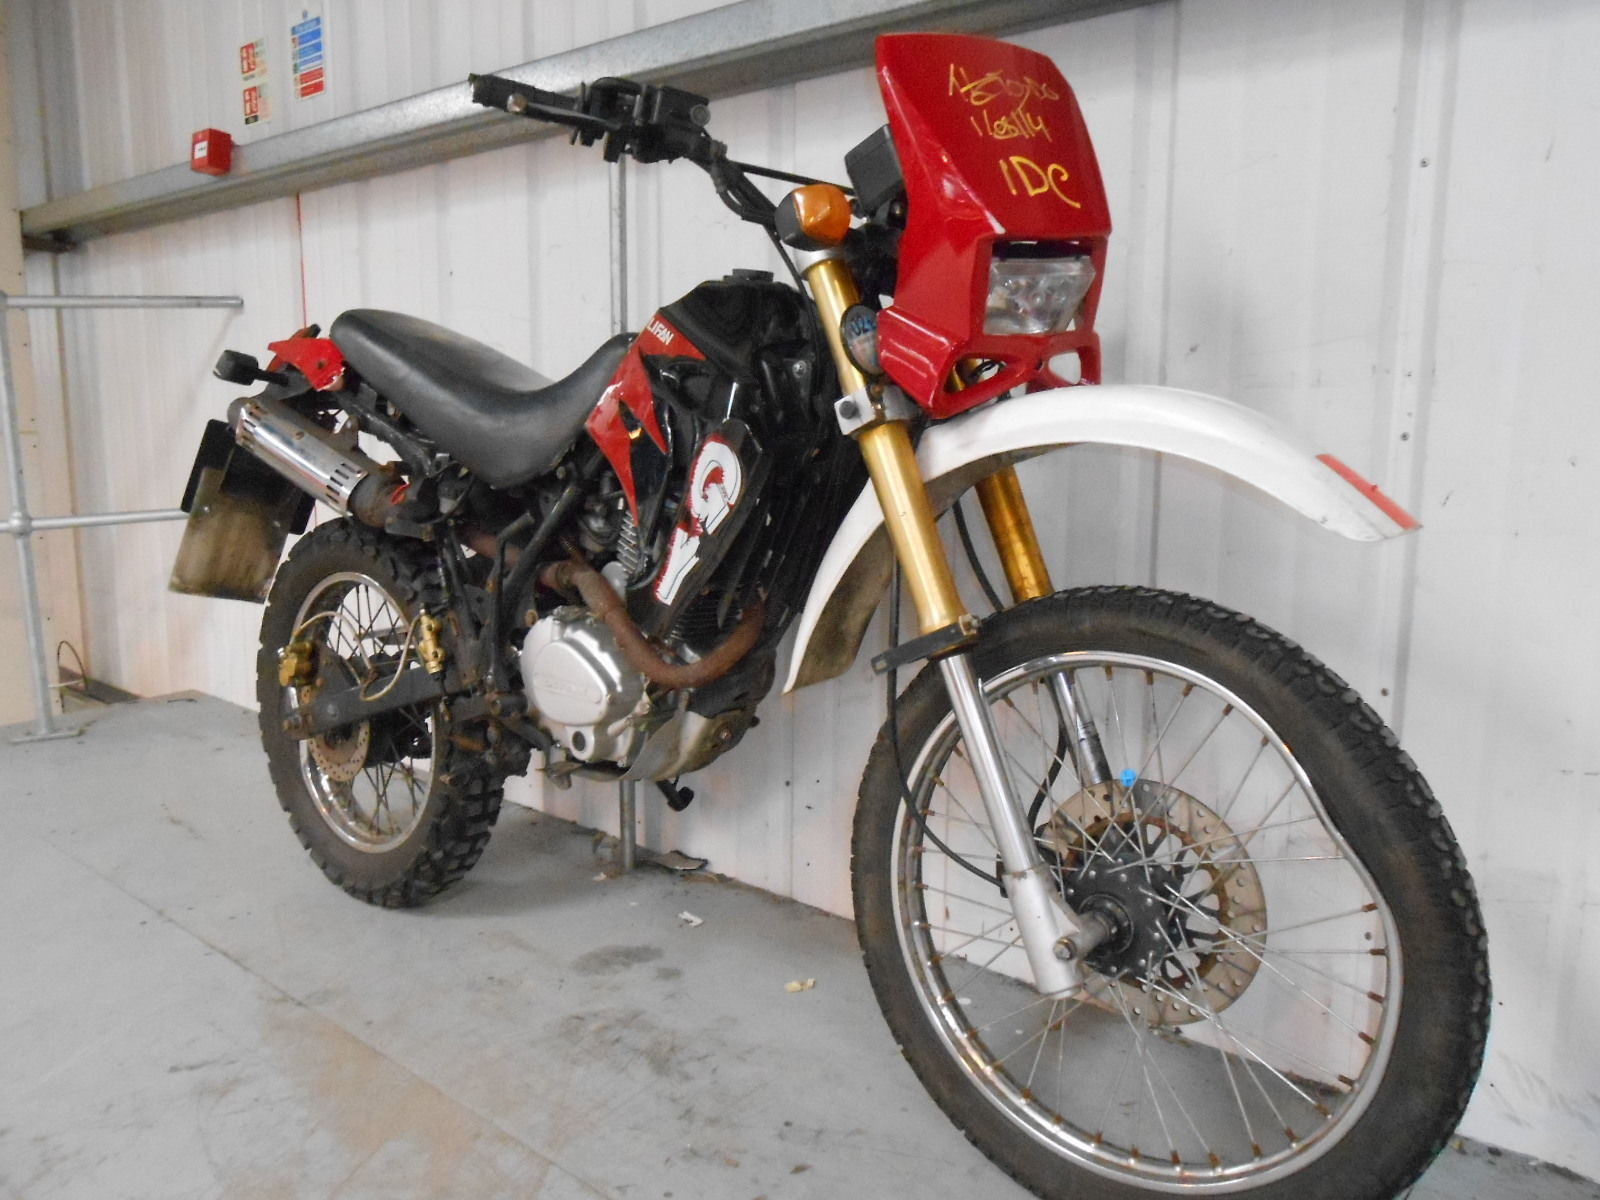 Lifan Bikes and ATVs (With Pictures)